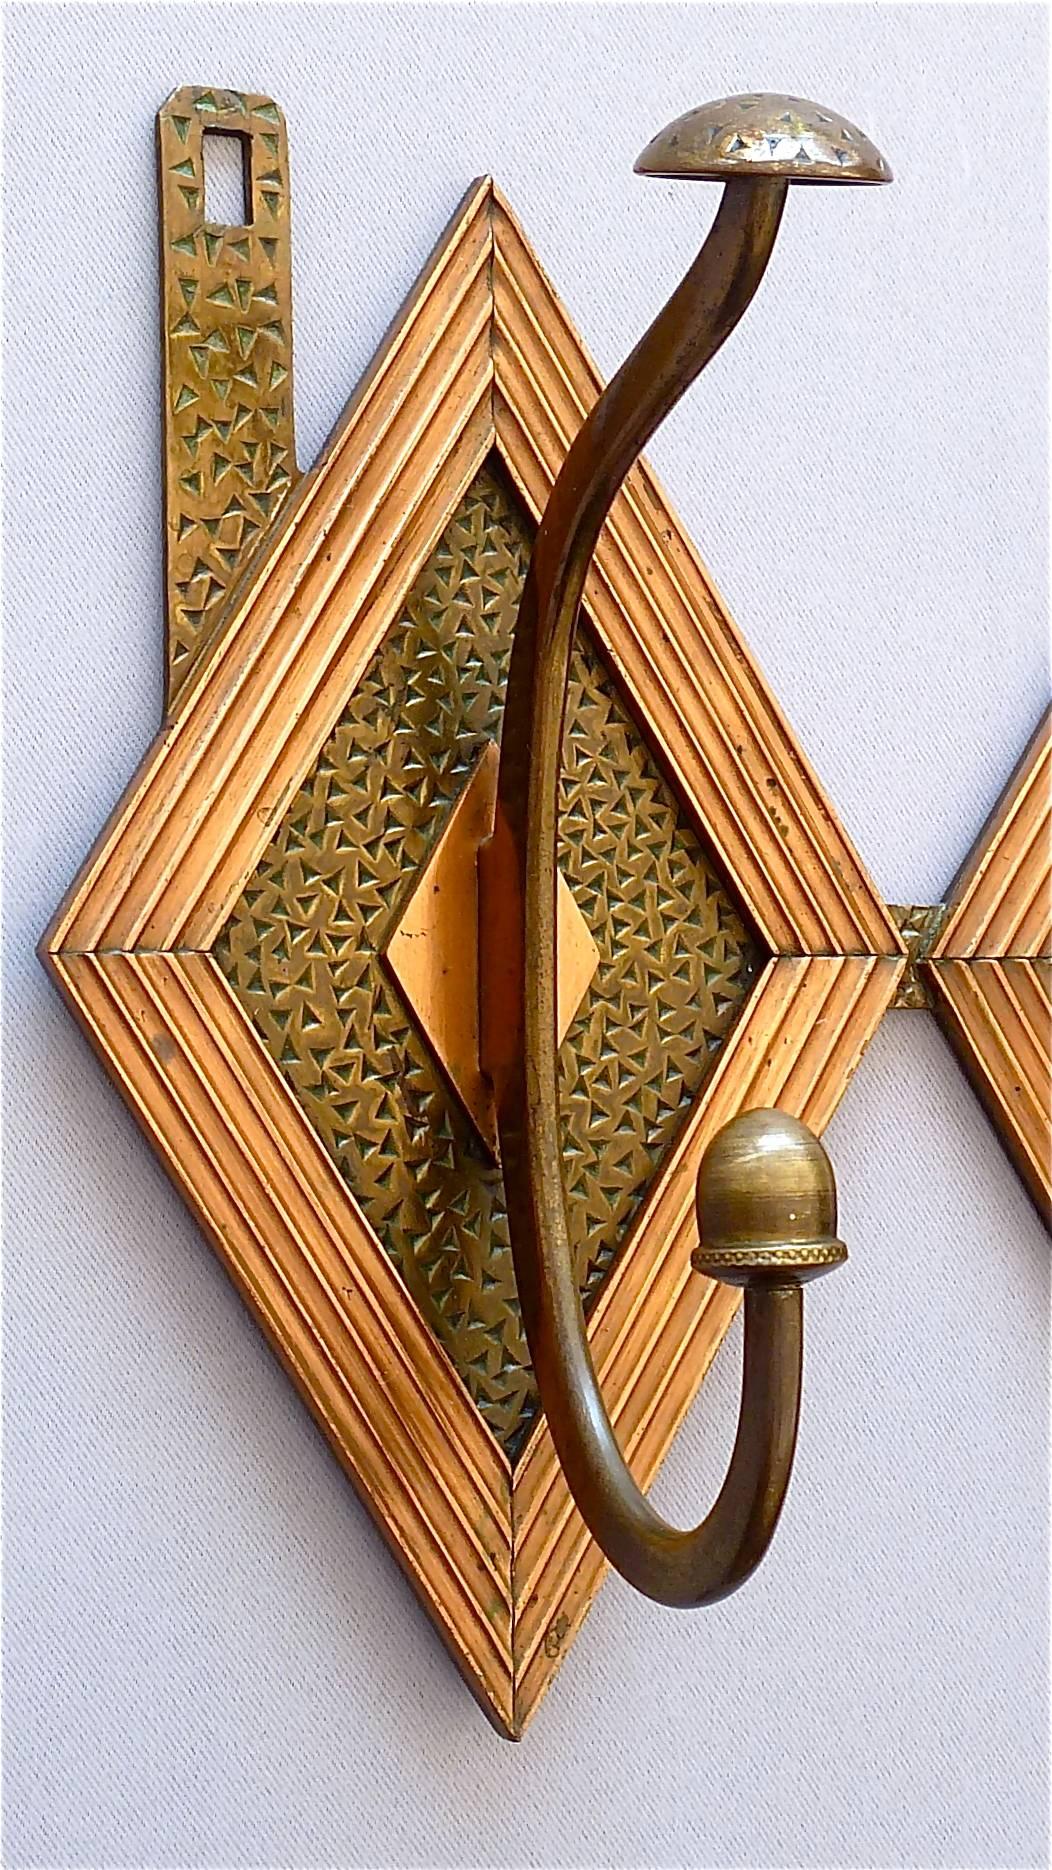 Wonderful geometric patinated bronze with copper Art Nouveau or Art Deco three-scrolled-hook wall wardrobe with a beautiful hammered surface decor, France circa 1900-1920. This rare and heavy piece which is hand- made is of high quality and best